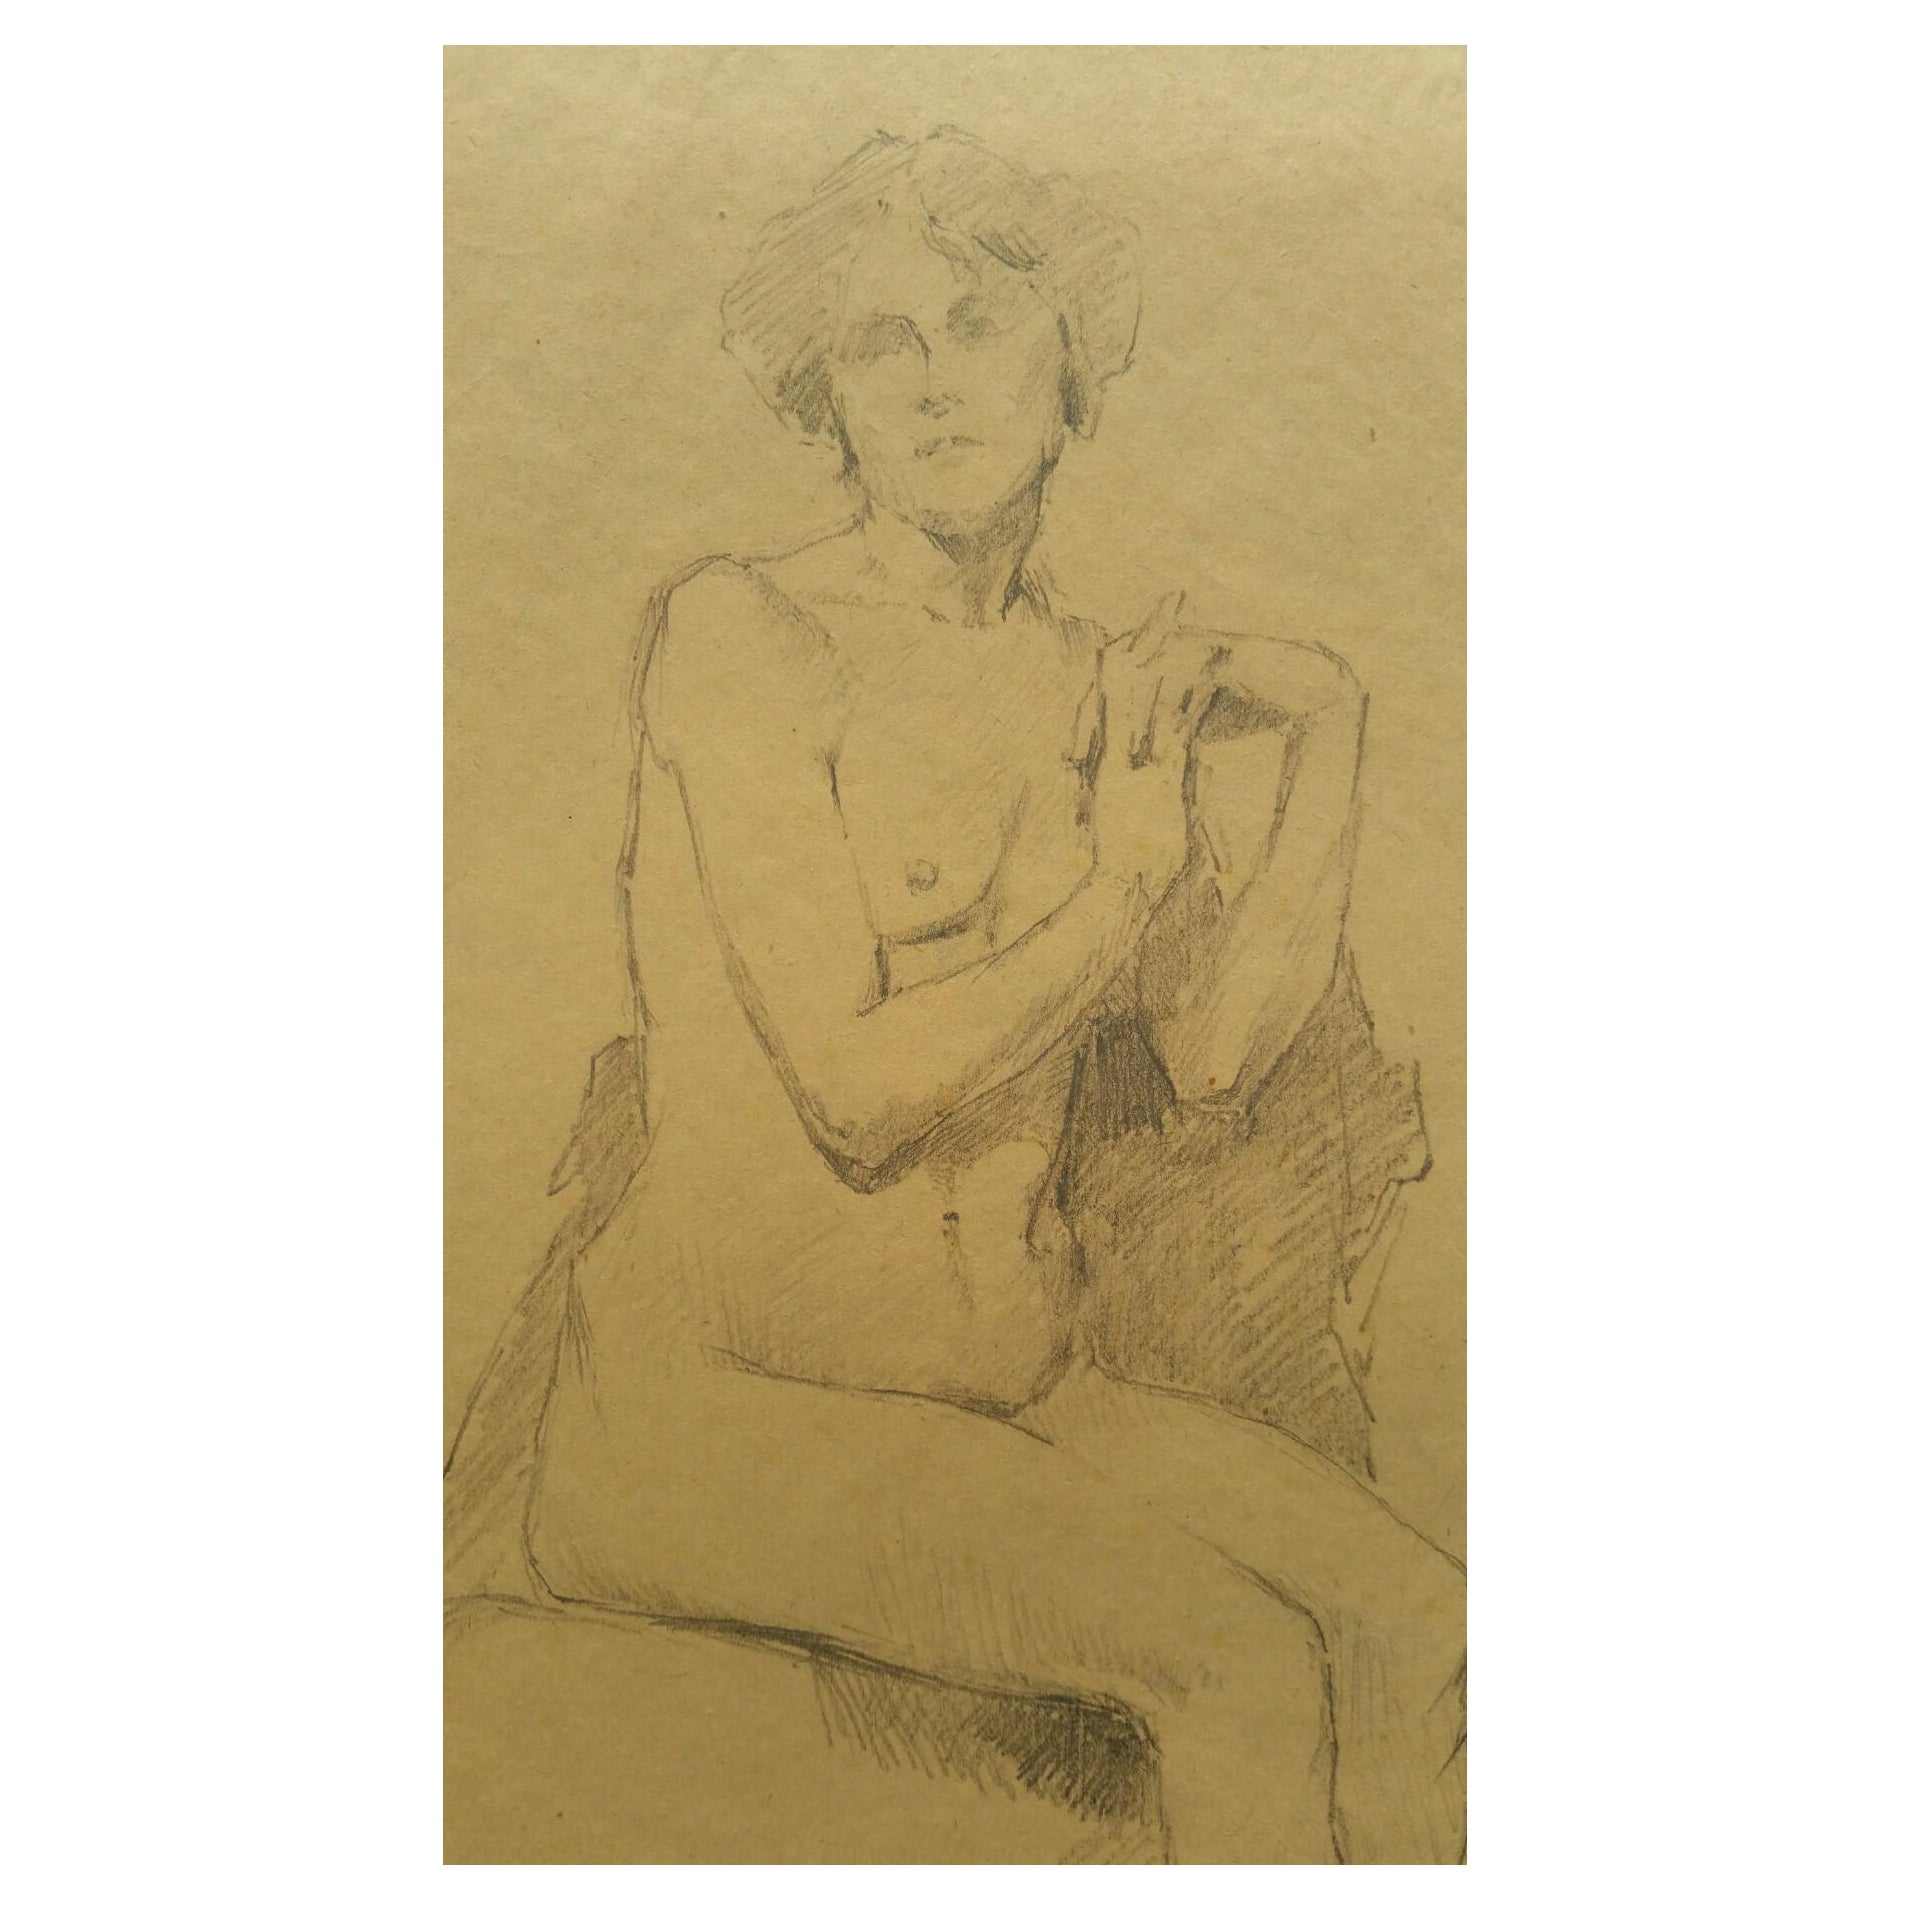 English Antique Portrait Sketch of Female Nude Seated 'with Additional Image' For Sale